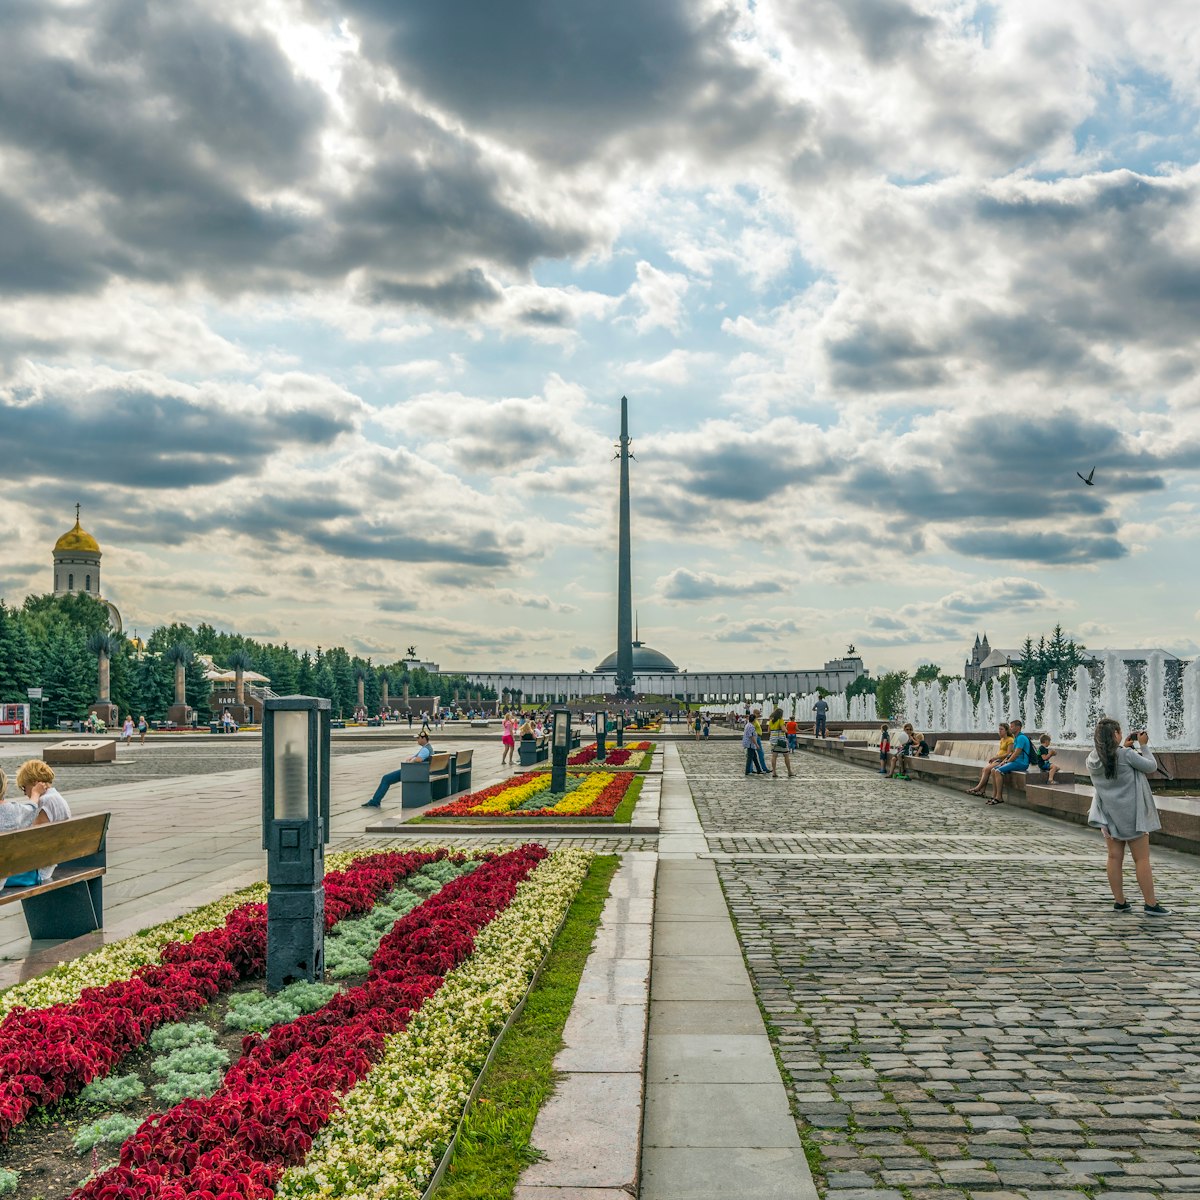 Park Pobedy (Victory park) at Poklonnaya hill in Moscow, Russia.